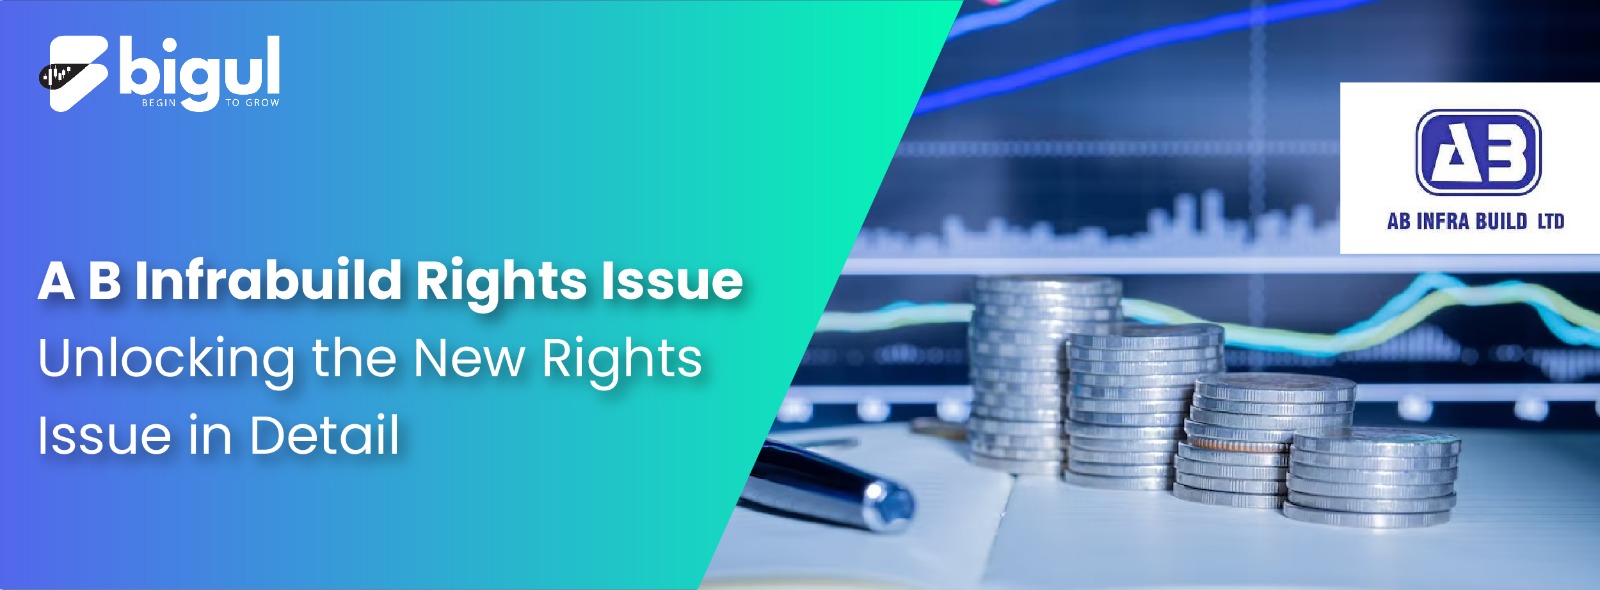 A B Infrabuild Rights Issue: Unlocking the New Rights Issue in Detail